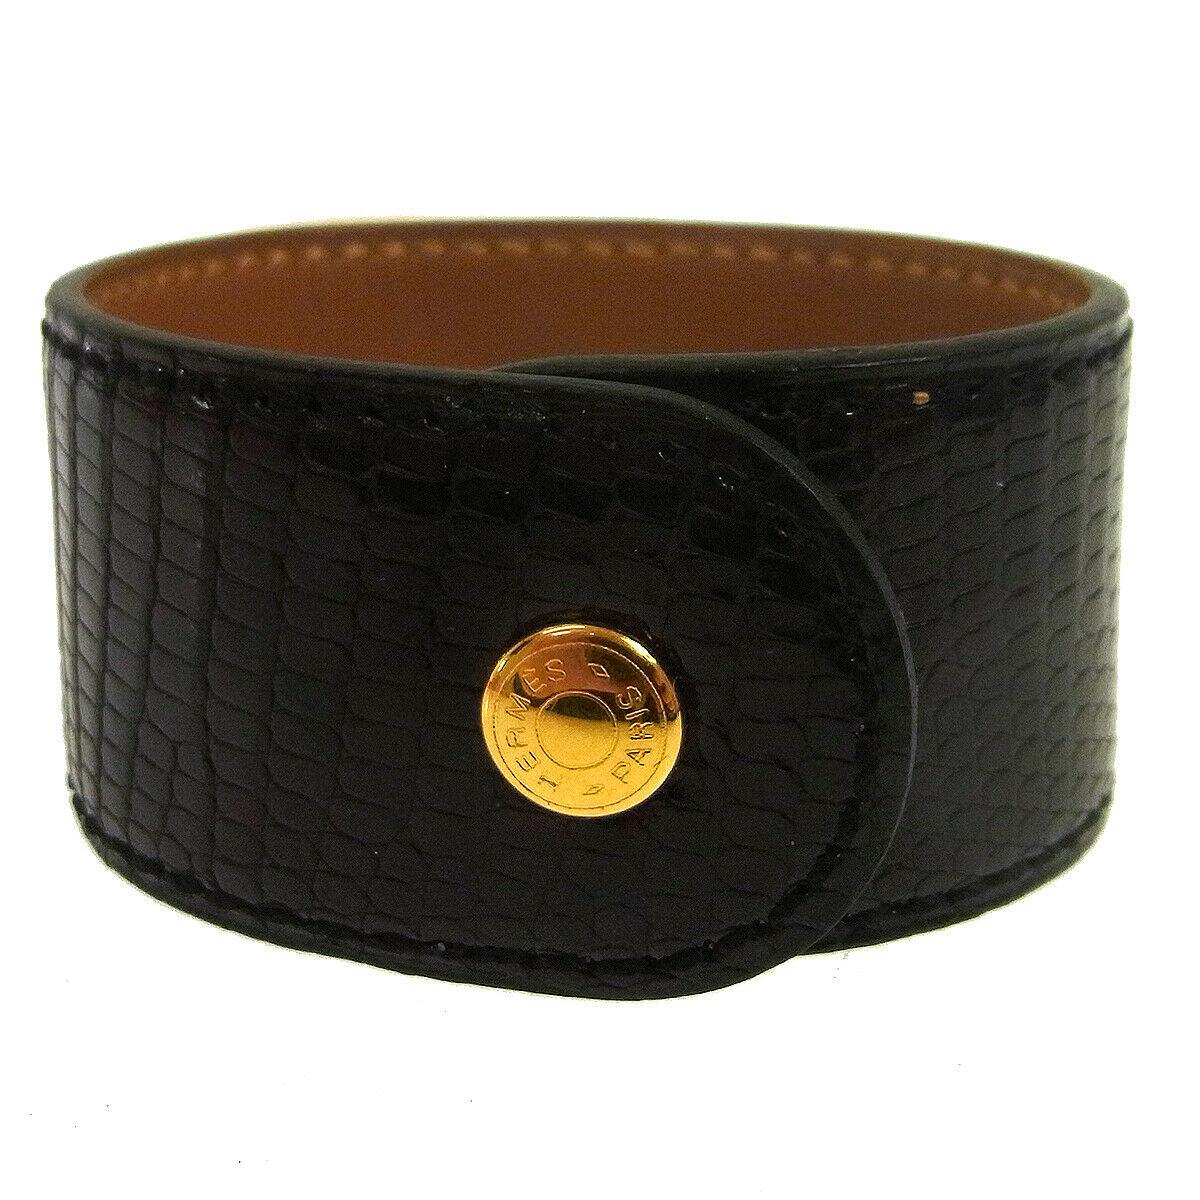 Hermes Black Leather Lizard Exotic Gold Stud Men's Women's Evening Cuff Bracelet in Box

Leather
Metal
Gold tone hardware
Snap closure
Made in France
Date code present
Width 1